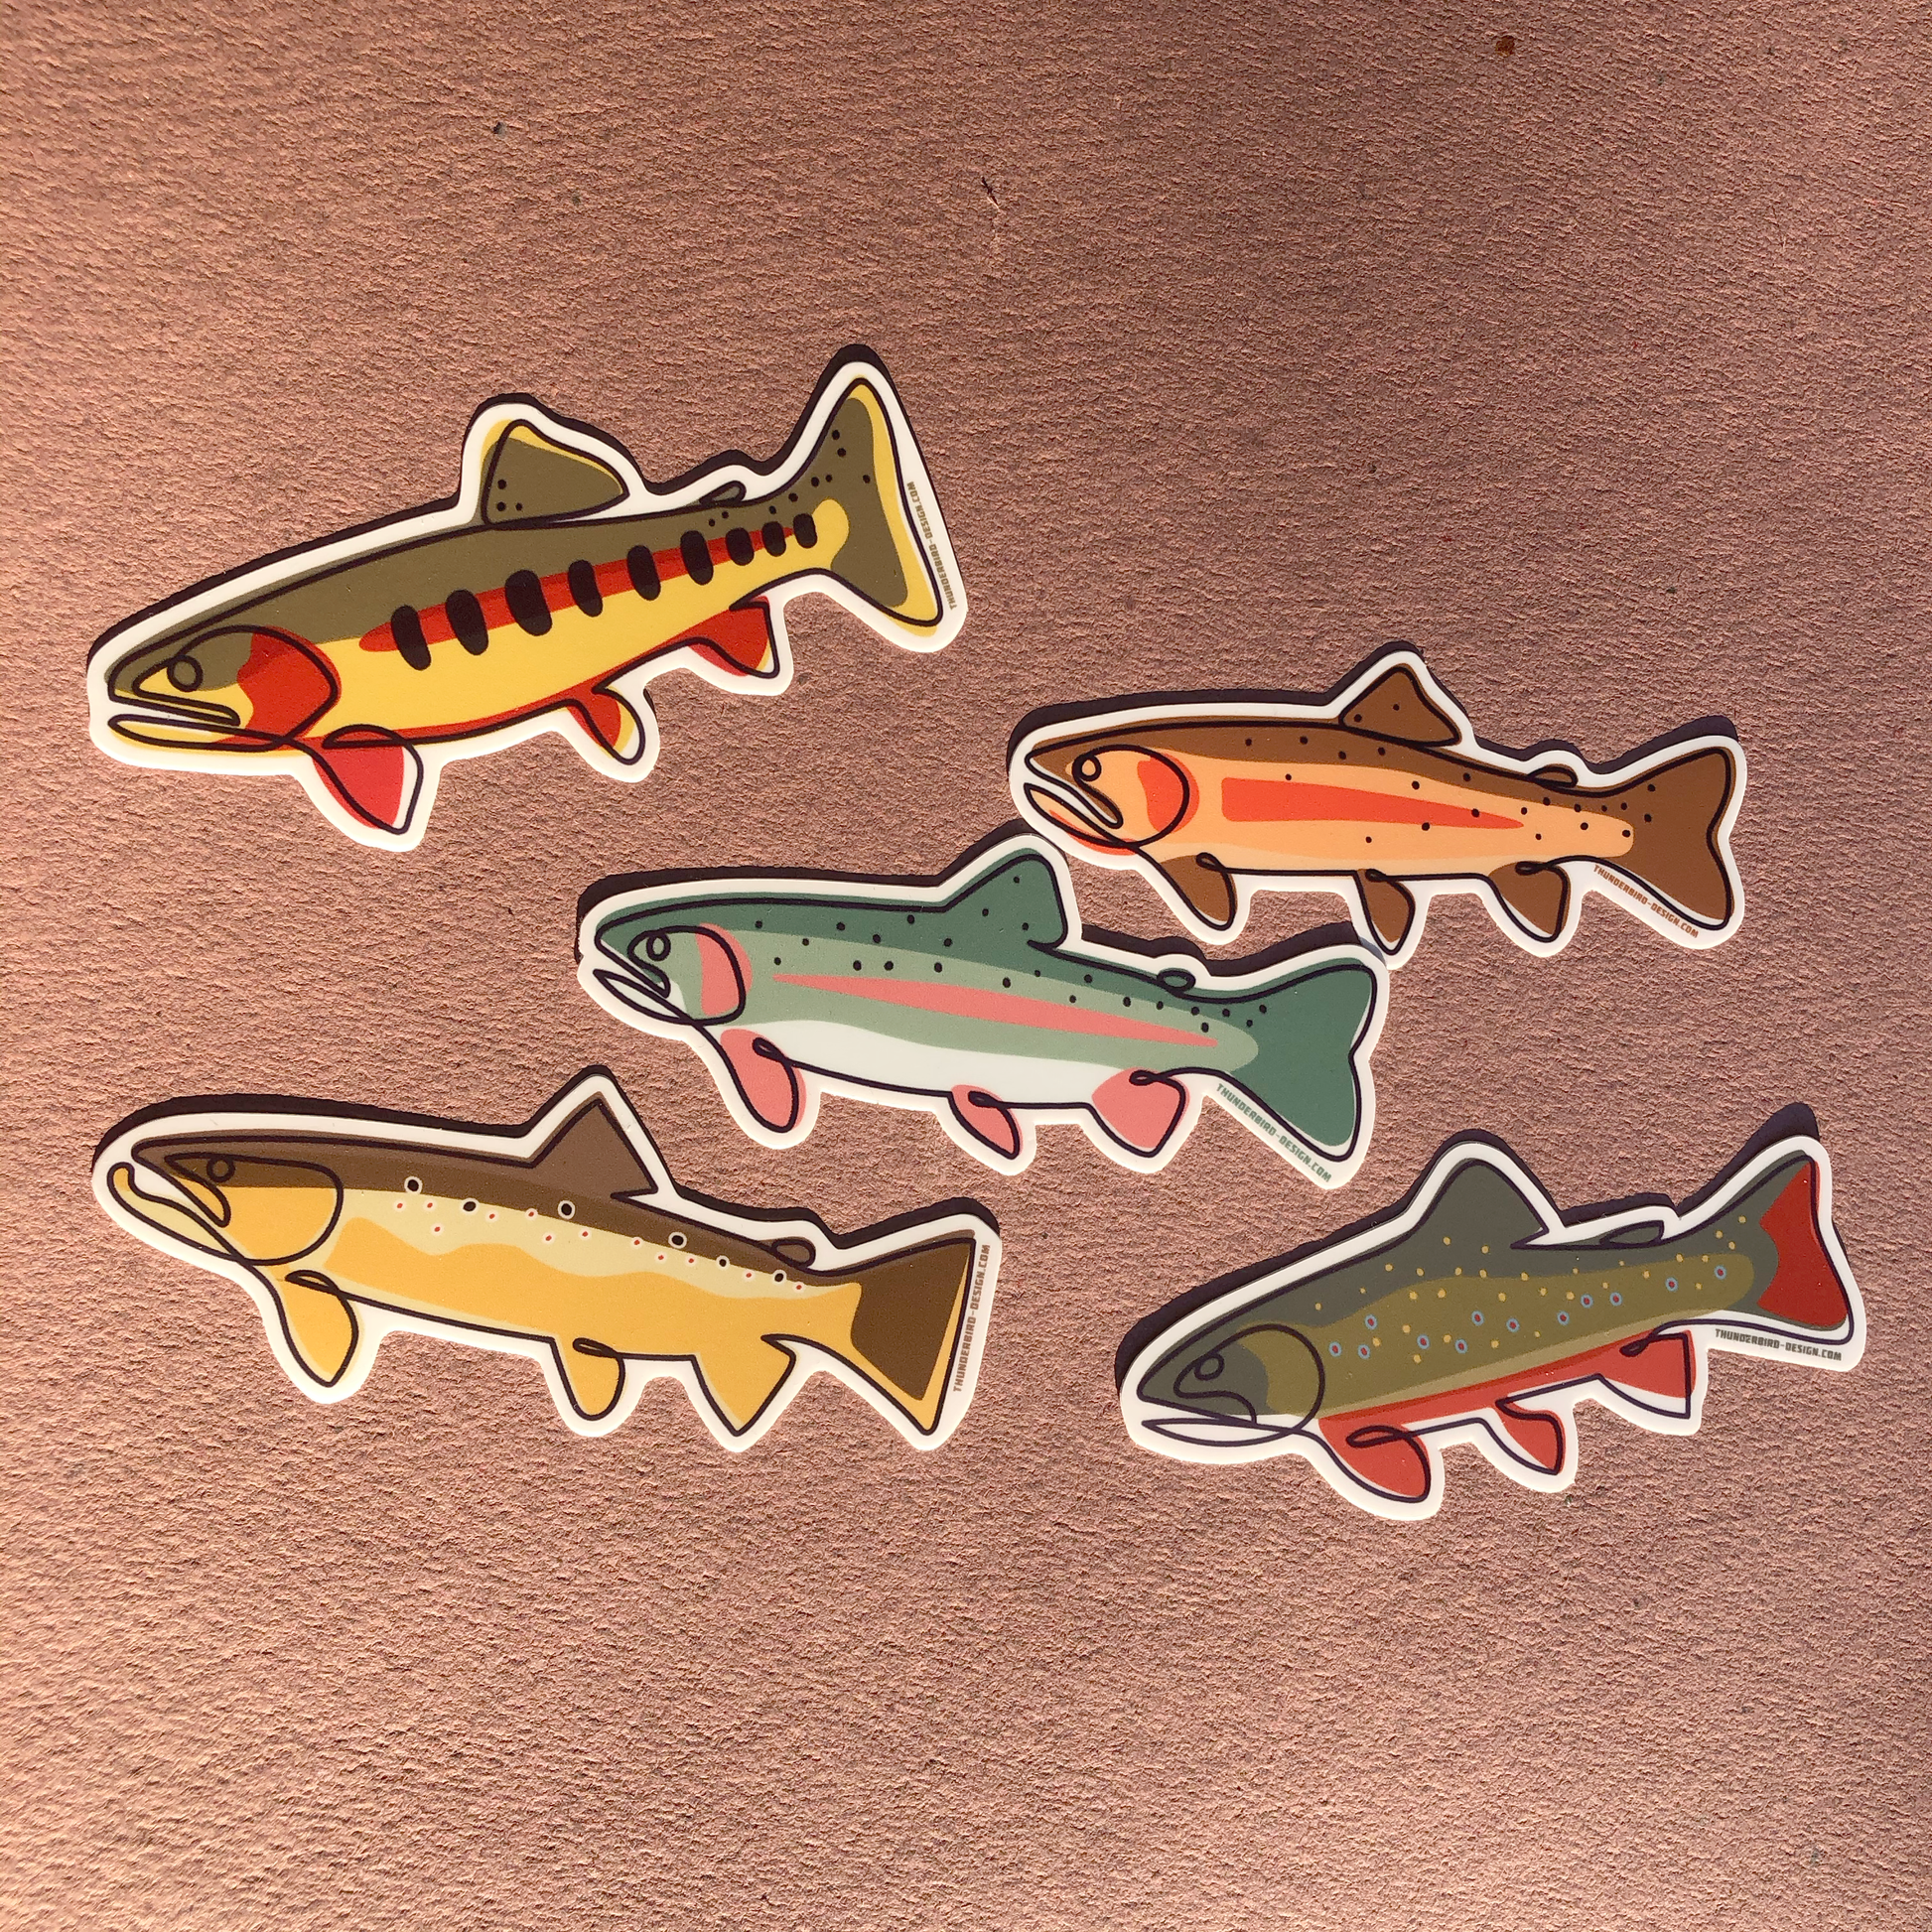 Thunderbird Outdoor SupplyTrout Grand Slam Decal Pack - Matte 4" DecalsTrout Grand Slam Decal Pack - Matte 4" Decals
Drawn, Single Line Contour Illustration of a Golden, Cutthroat, Rainbow, Brown and Brook Trout.These weatherproof Matte decals are perfect for your Rod tube, water 